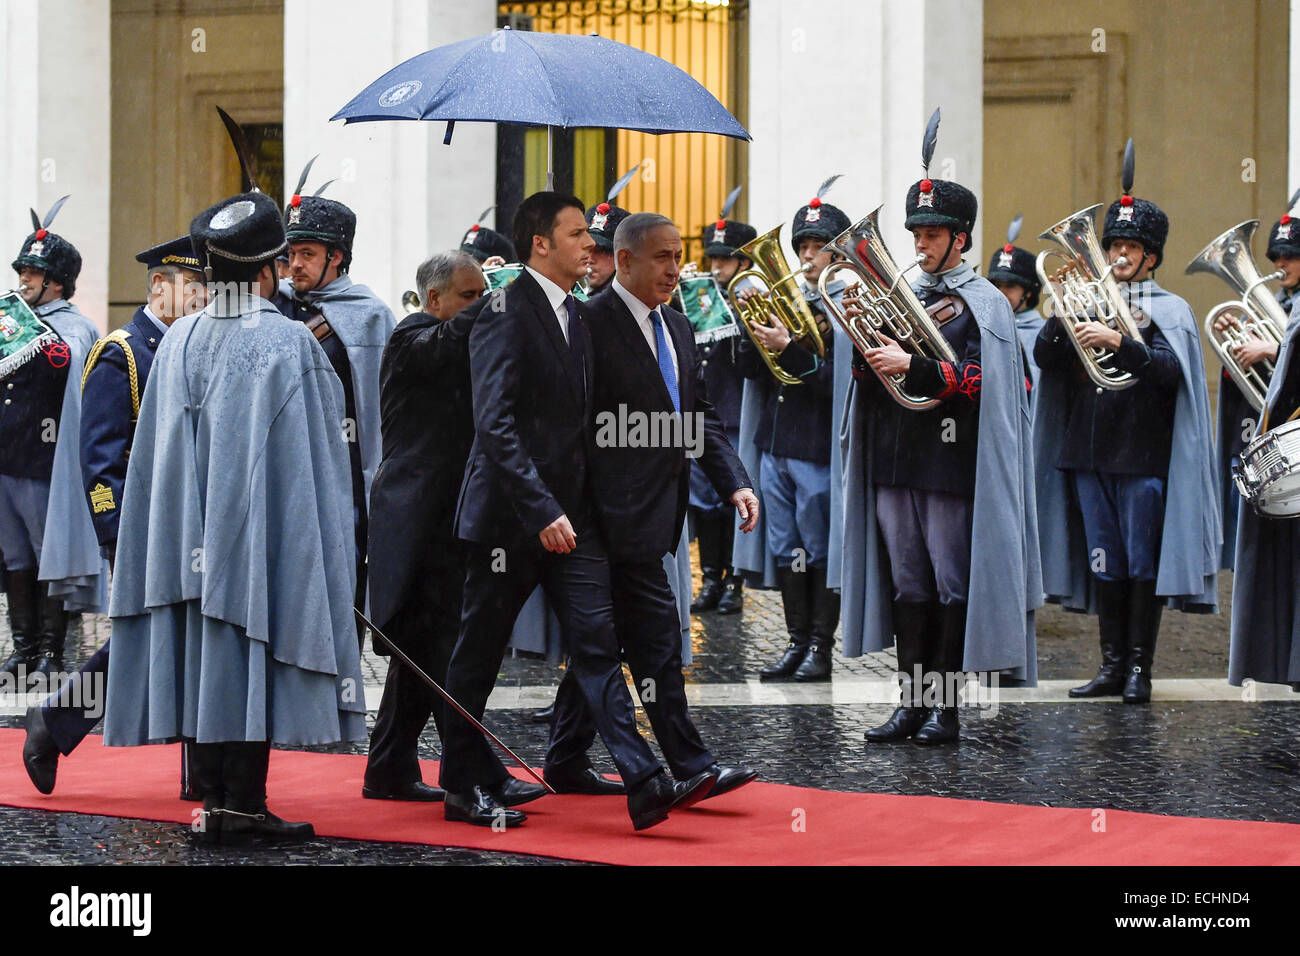 Rome, Italy. 15th Dec, 2014. Italian Prime Minister Matteo Renzi holds a welcoming ceremony for the visiting Israeli Prime Minister Benjamin Netanyahu in Rome, Italy, on Dec. 15, 2014. Credit:  Danilo Tacconi/Xinhua/Alamy Live News Stock Photo